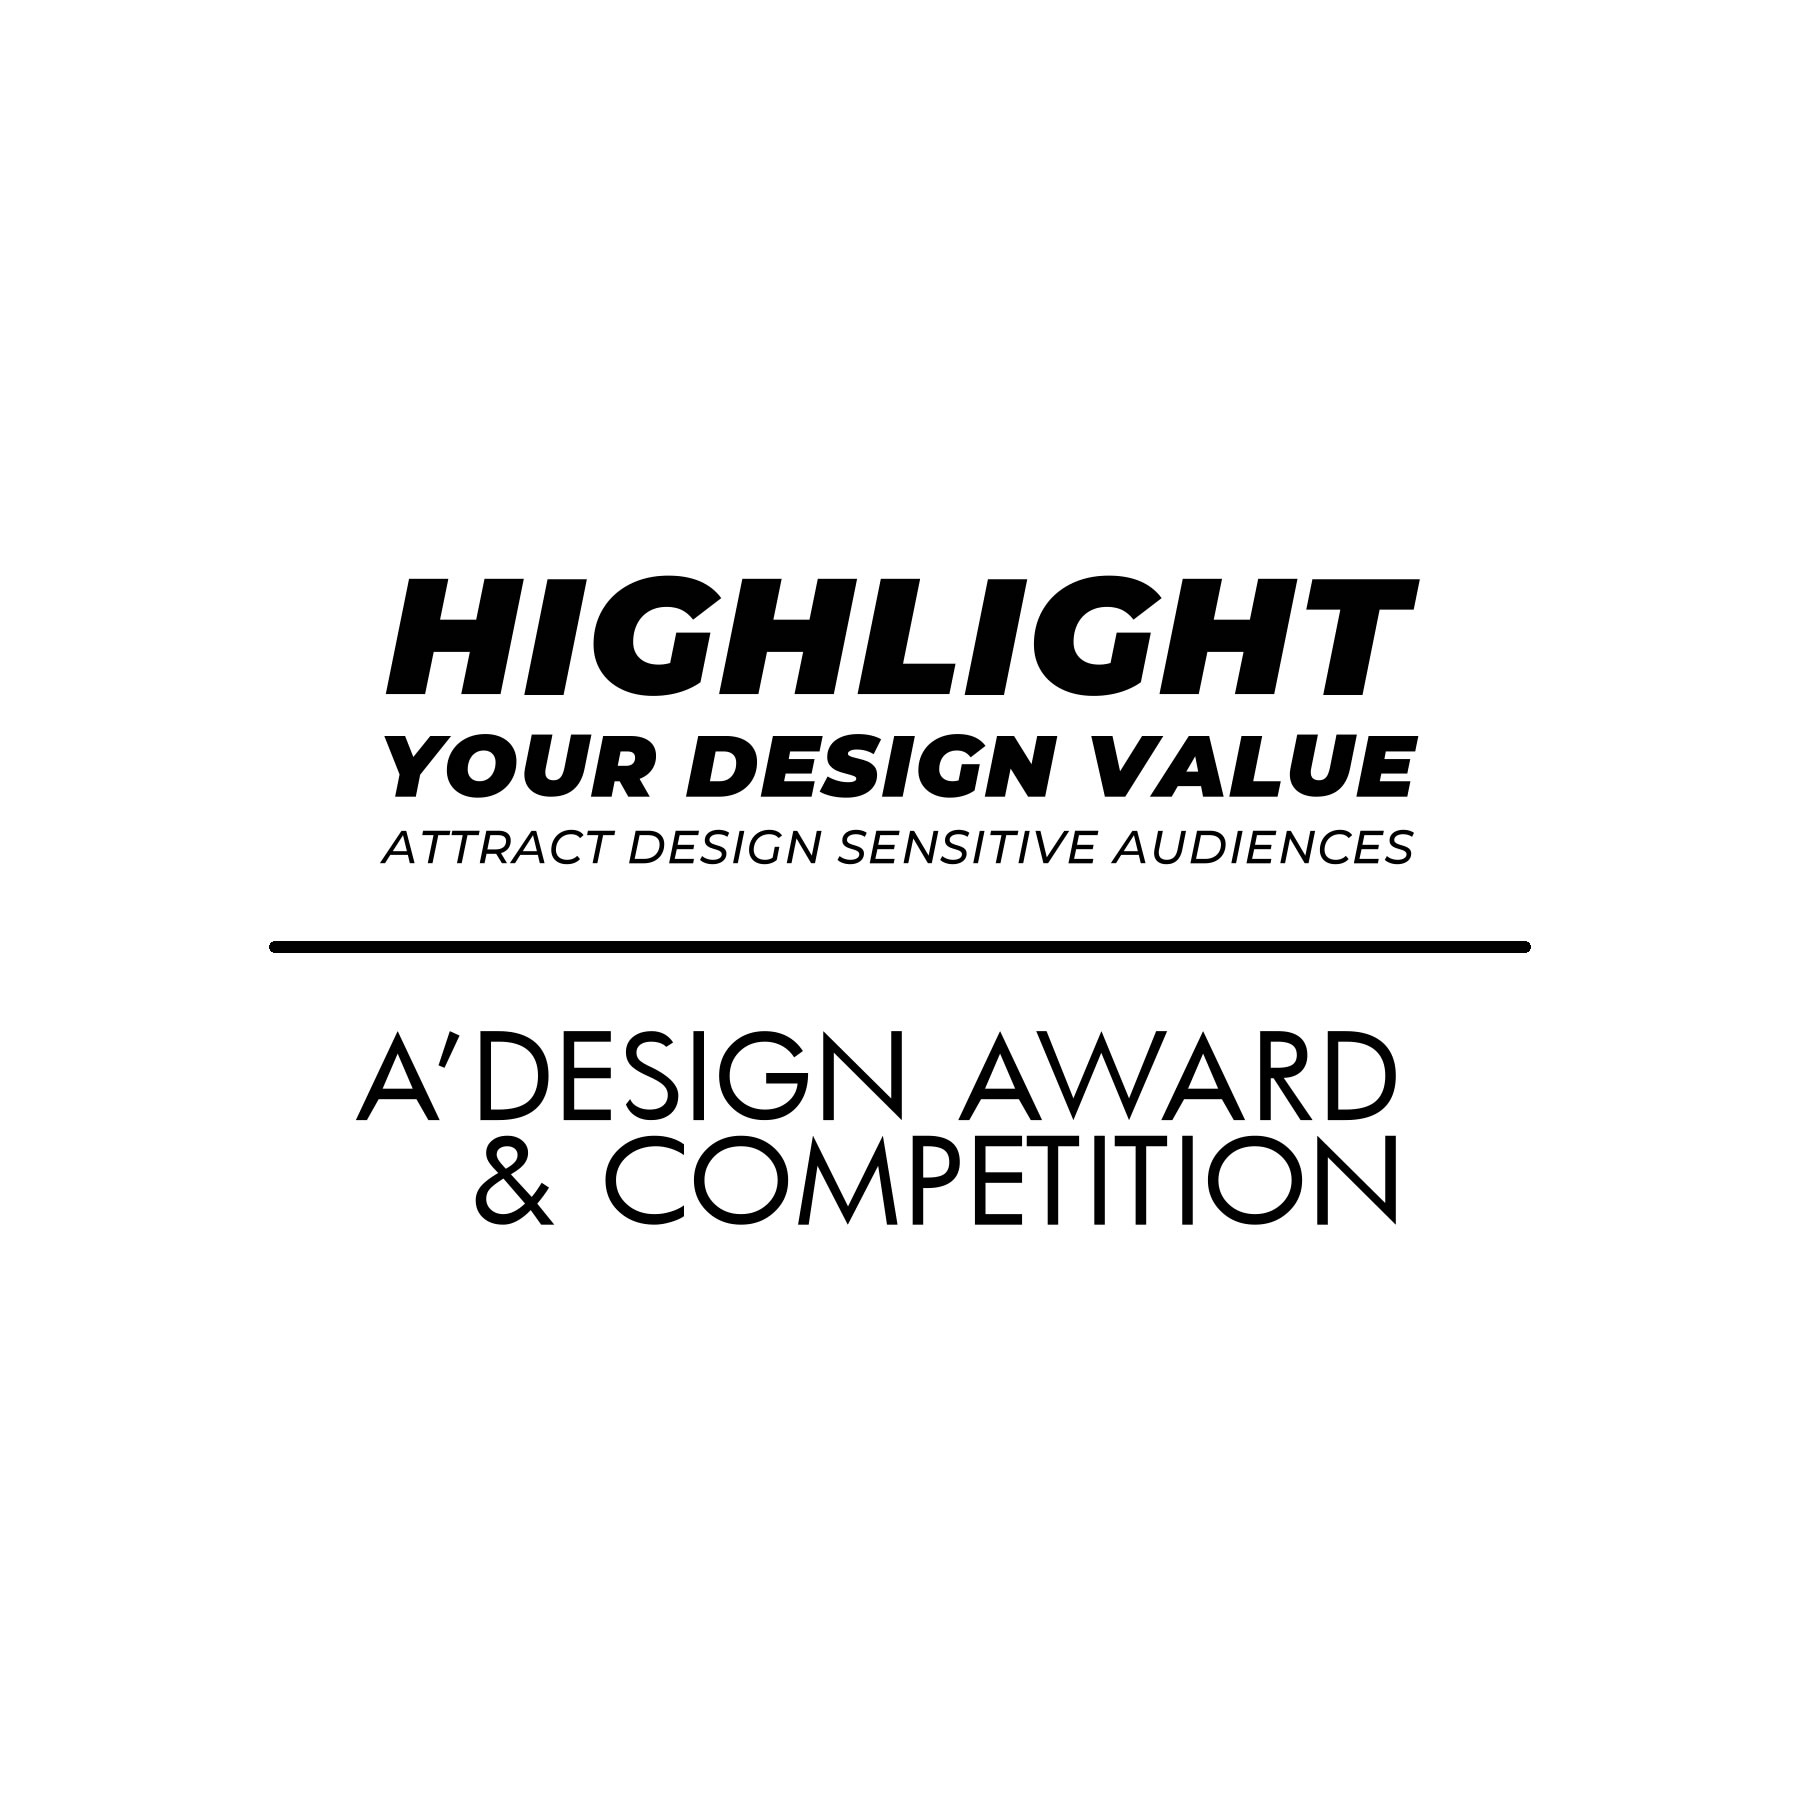 Highlight Your design value